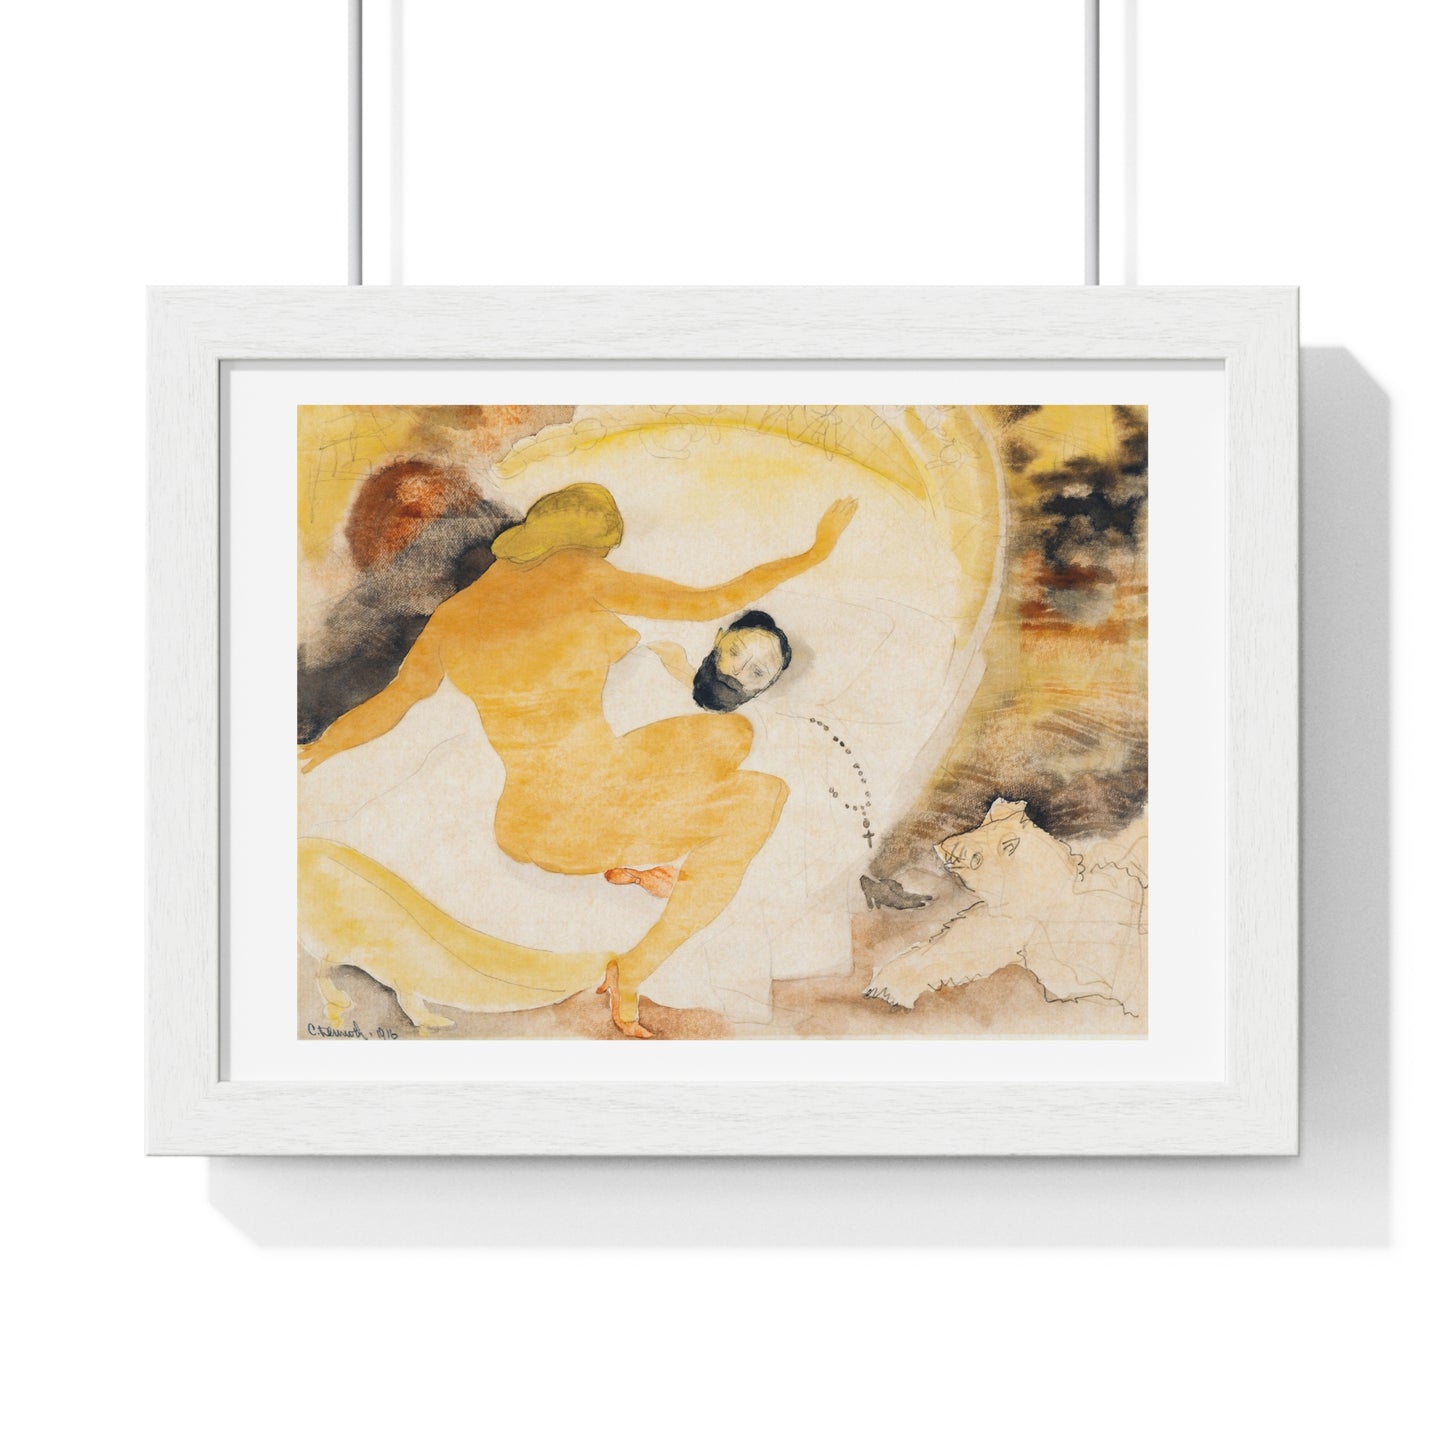 Nana and Count Muffat (1916) by Charles Demuth, from the Original, Framed Print